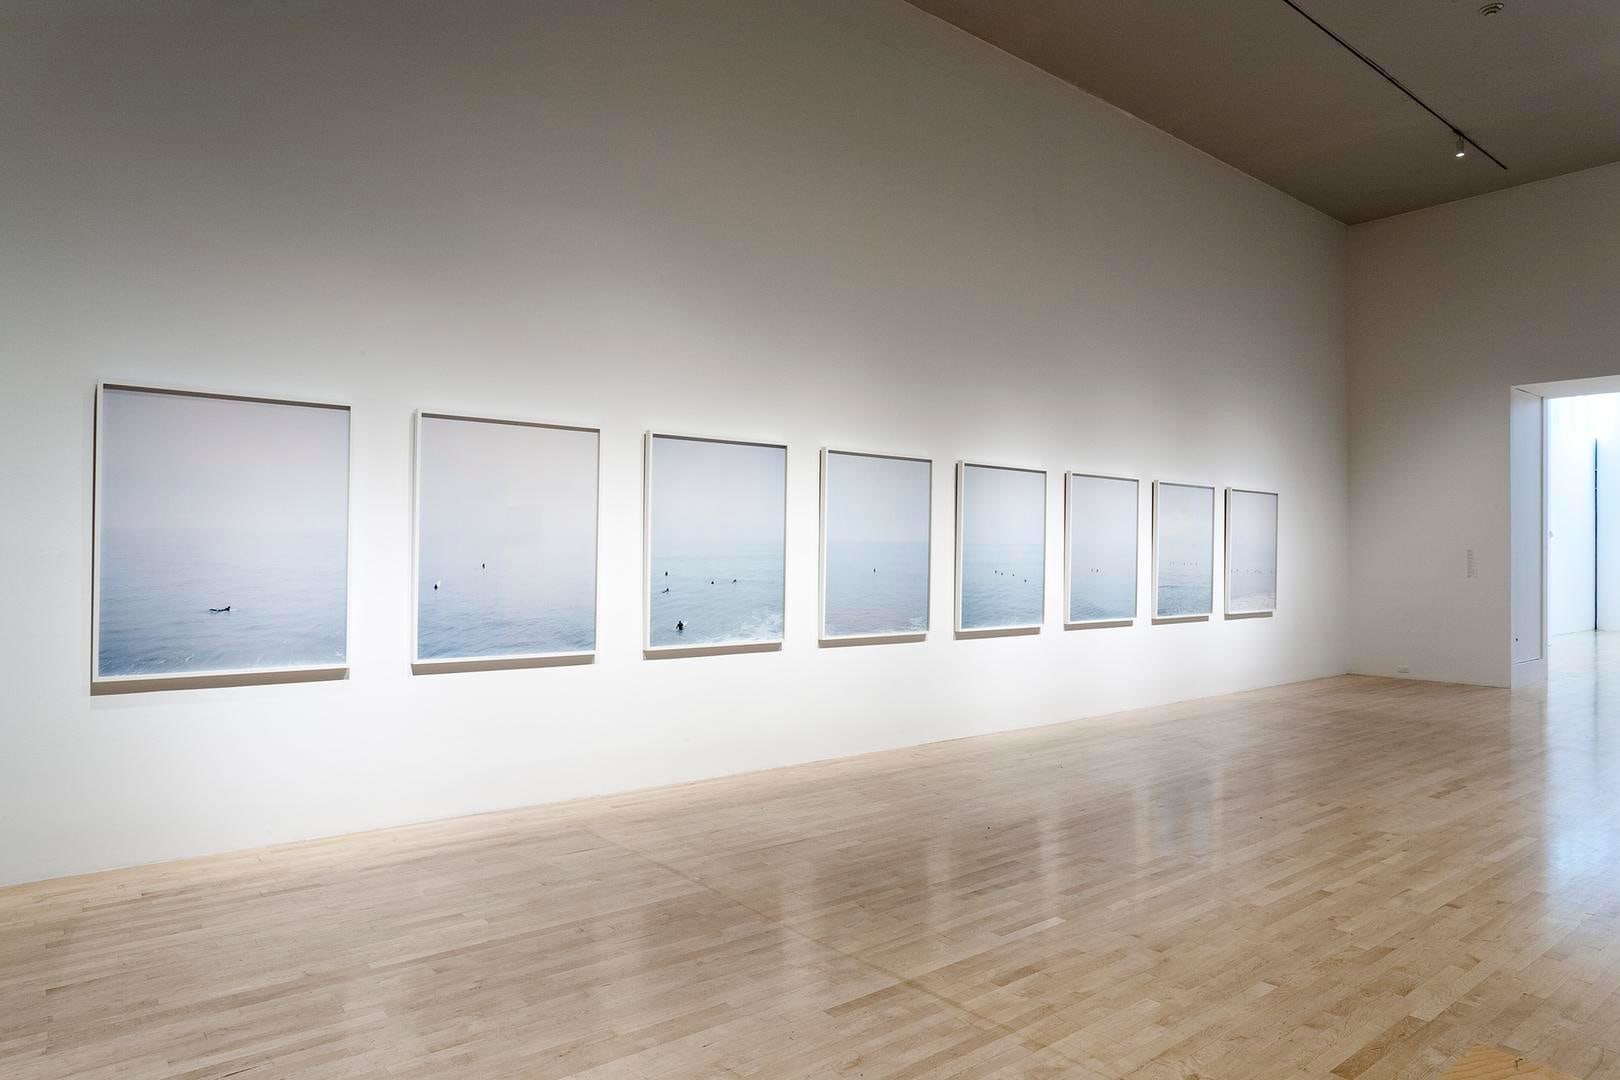  Installation view of Catherine Opie:&nbsp;Figure and Landscape&nbsp;at the Los Angeles County Museum of Art, Los Angeles